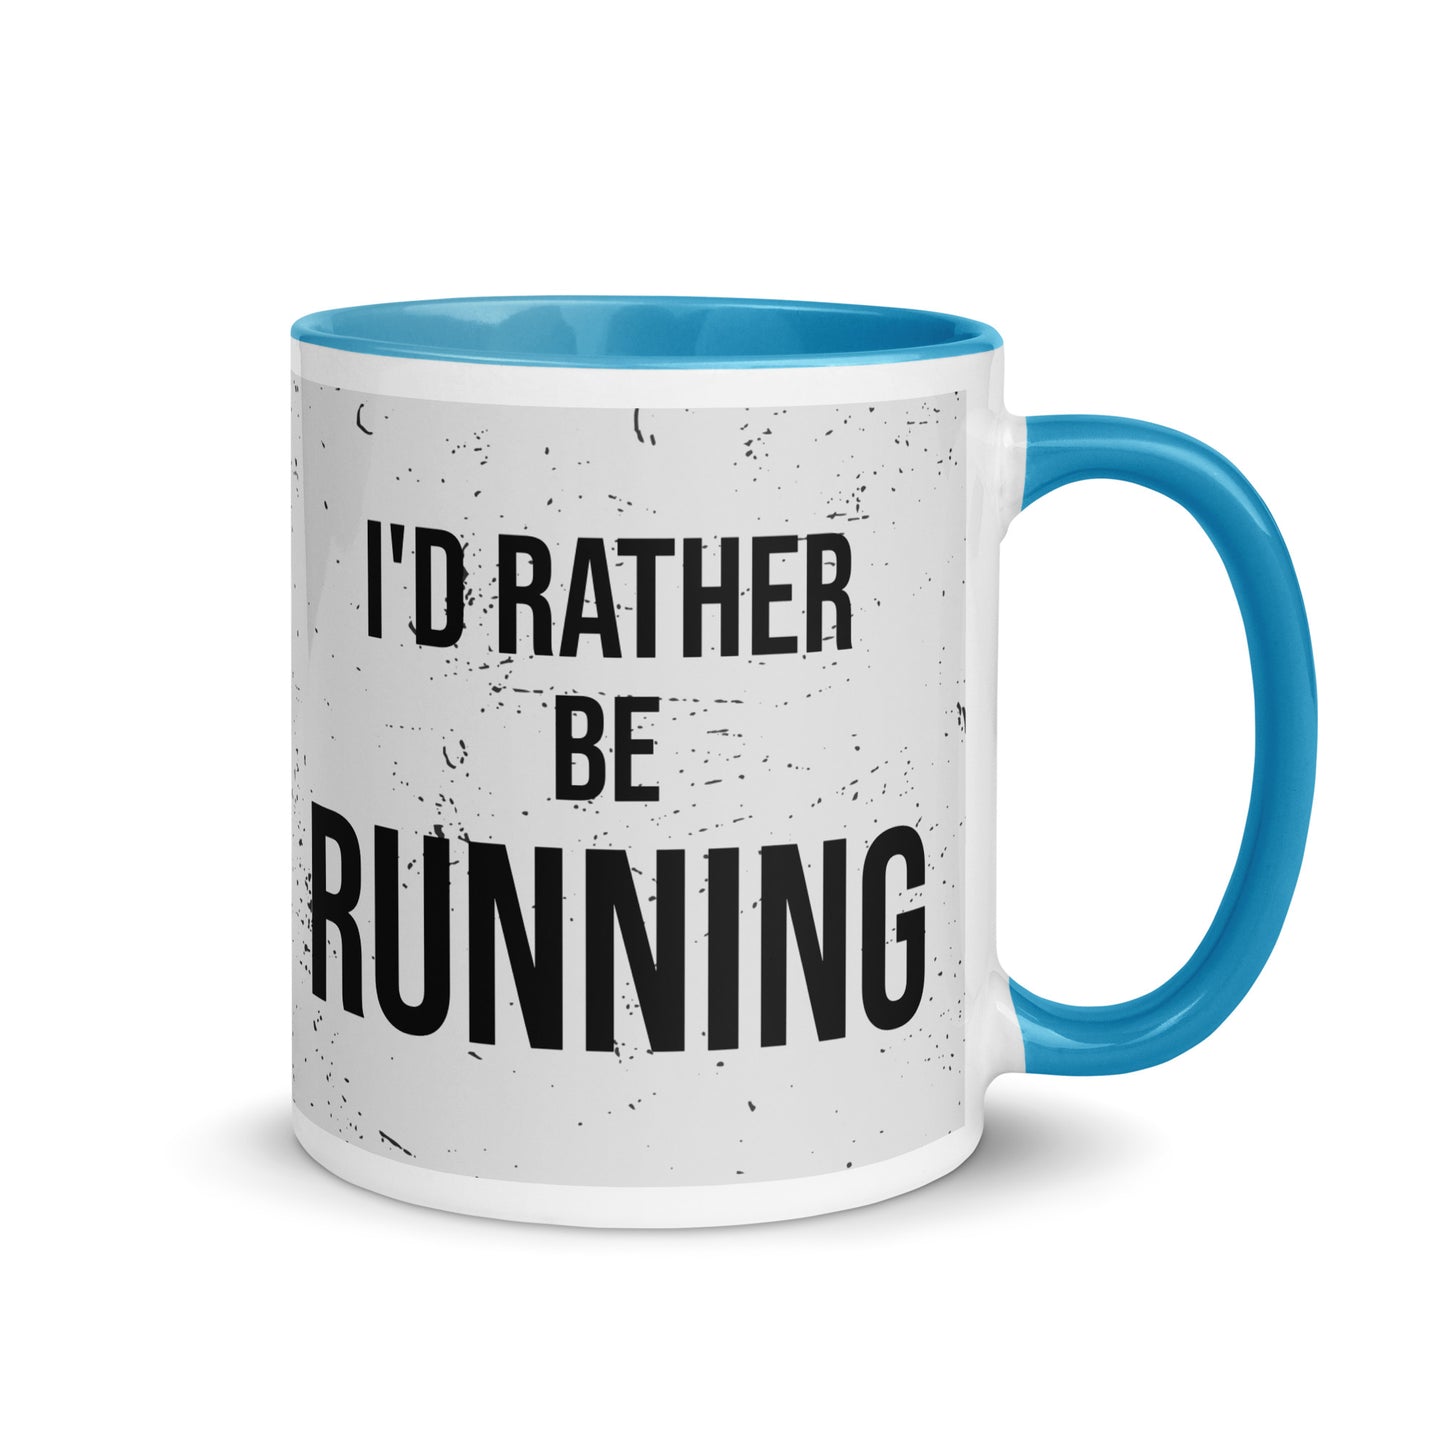 blue handled mug with a grey splatter design and the phrase I'd rather be running in a black font. the perfect gift for a runner